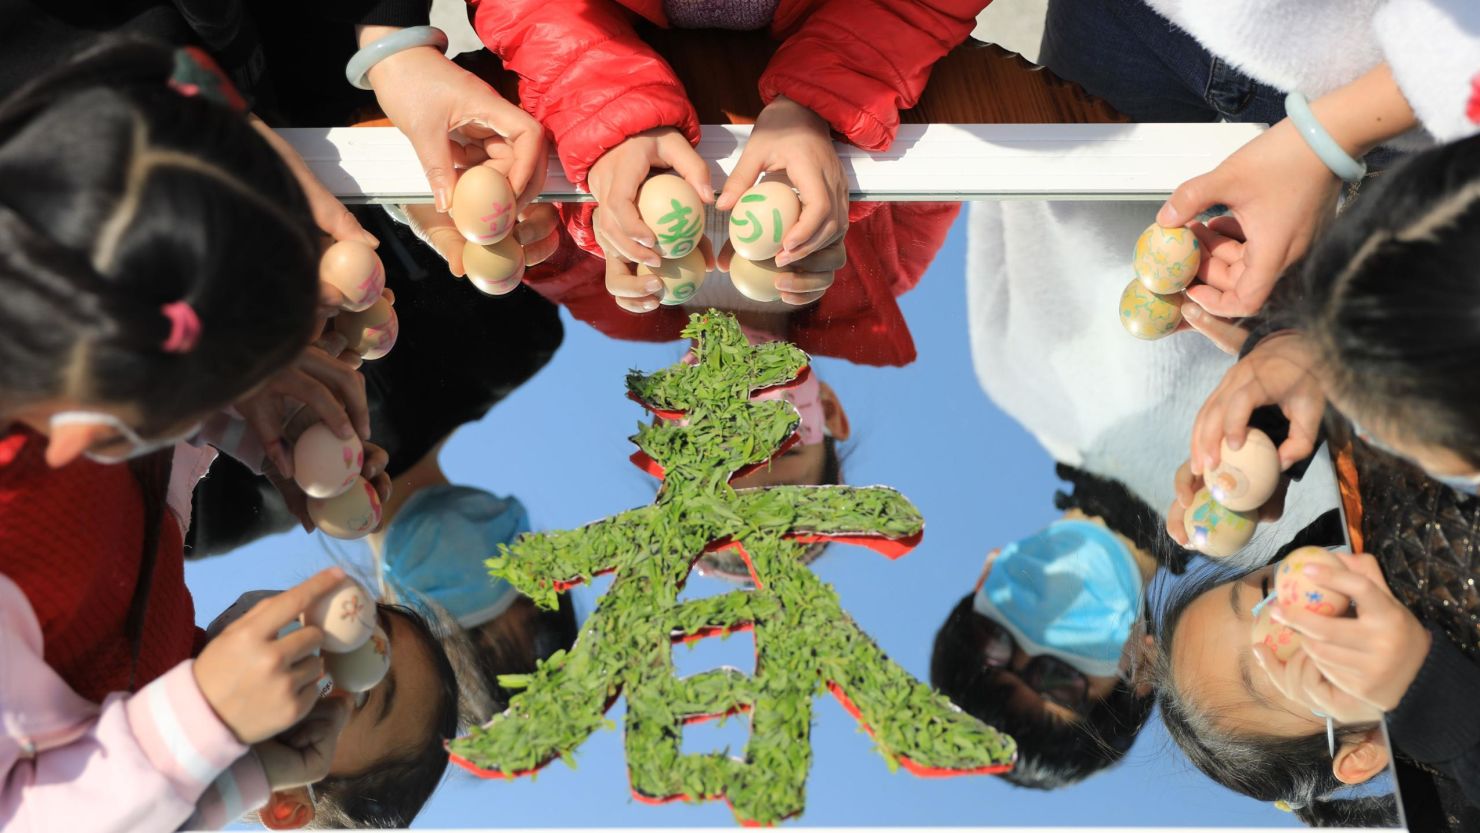 ZHEJIANG, CHINA - MARCH 19: (CHINA MAINLAND OUT)Childrens are playing egg standing game to welcome traditional festival "spring equinox" on 19th March, 2020 in Hangzhou,Zhejiang,China.(Photo by TPG/Getty Images)